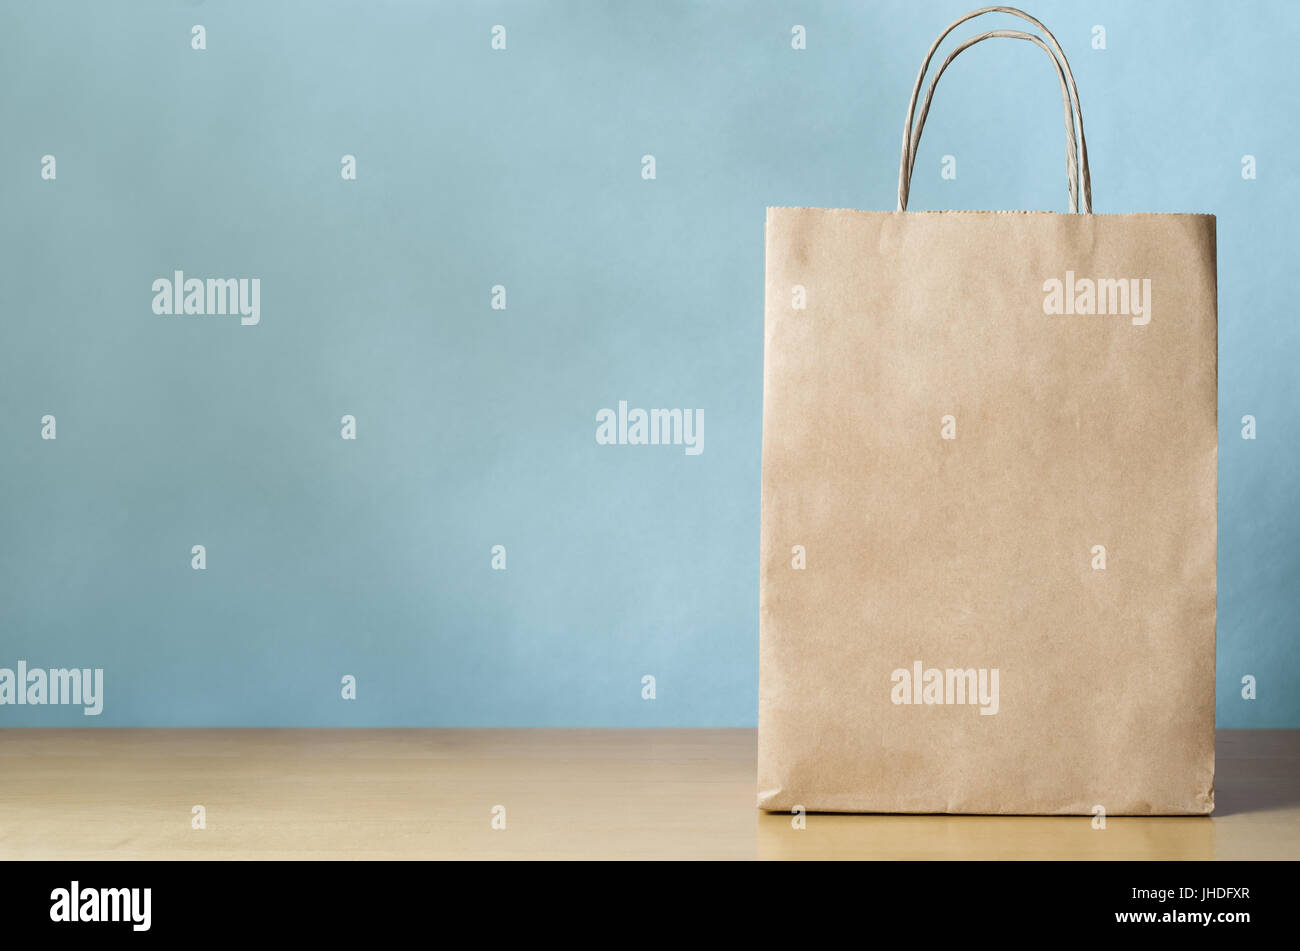 Blank brown paper carrier bag with handles for shopping, facing front on right side of a light wood veneer table with pale blue wall background provid Stock Photo